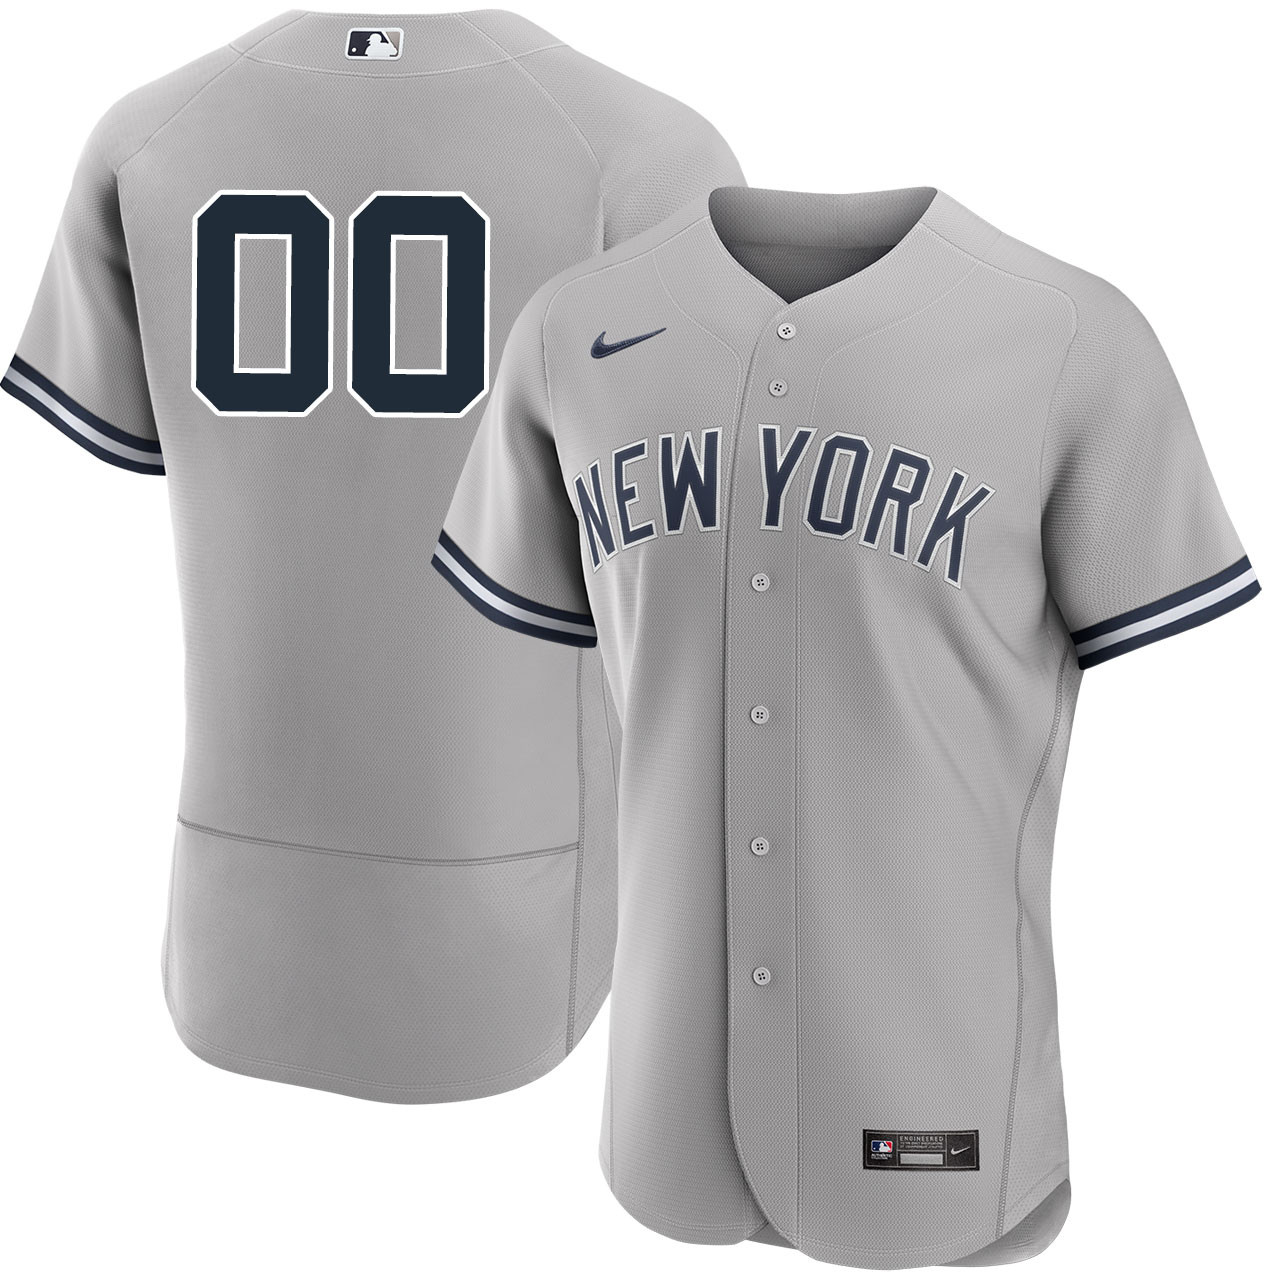 NY Yankees Replica Personalized Youth Road Jersey